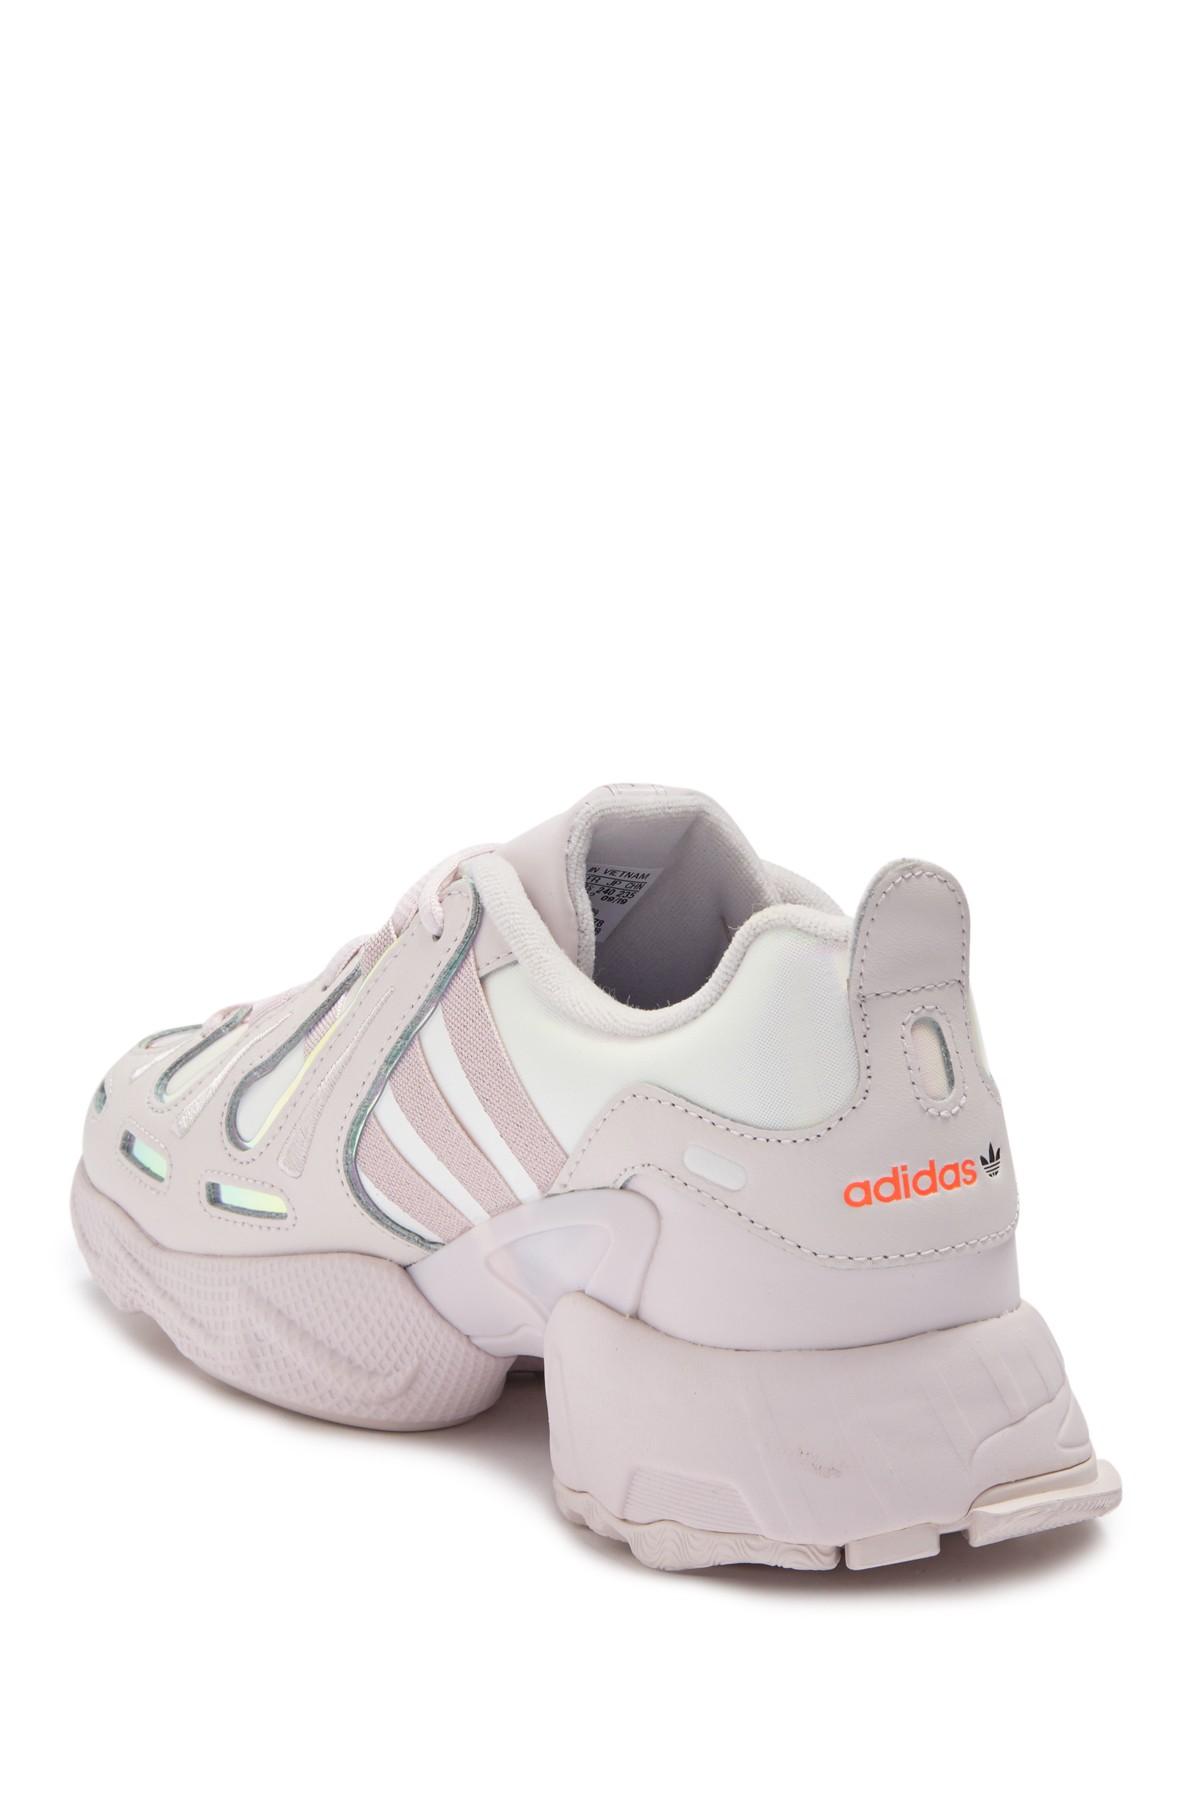 adidas eqt gazelle dad chunky sneakers